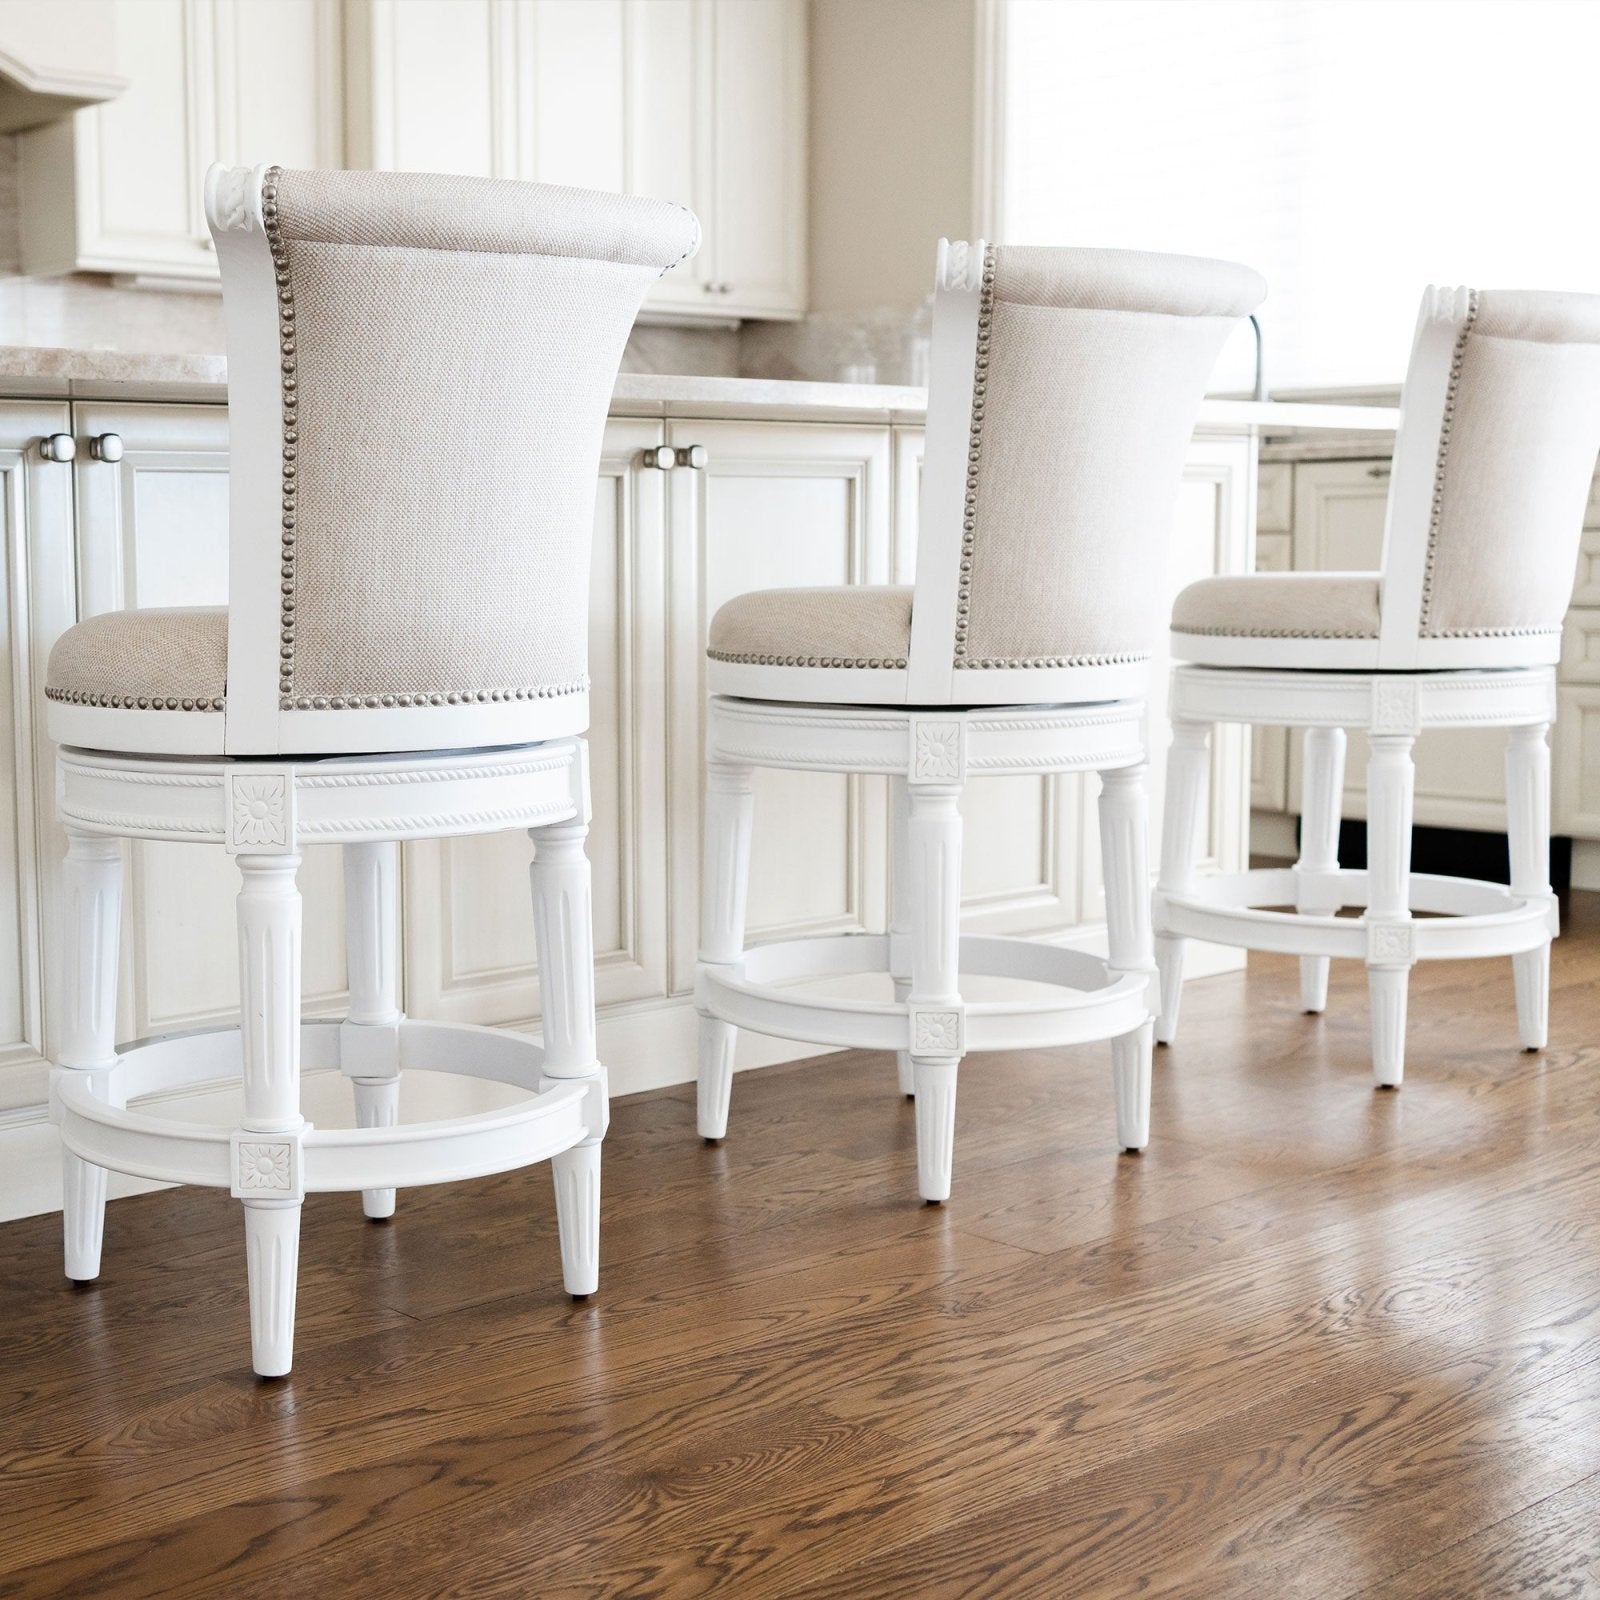 Pullman Counter Stool in Alabaster White Finish with Cream Fabric Upholstery in Stools by Maven Lane